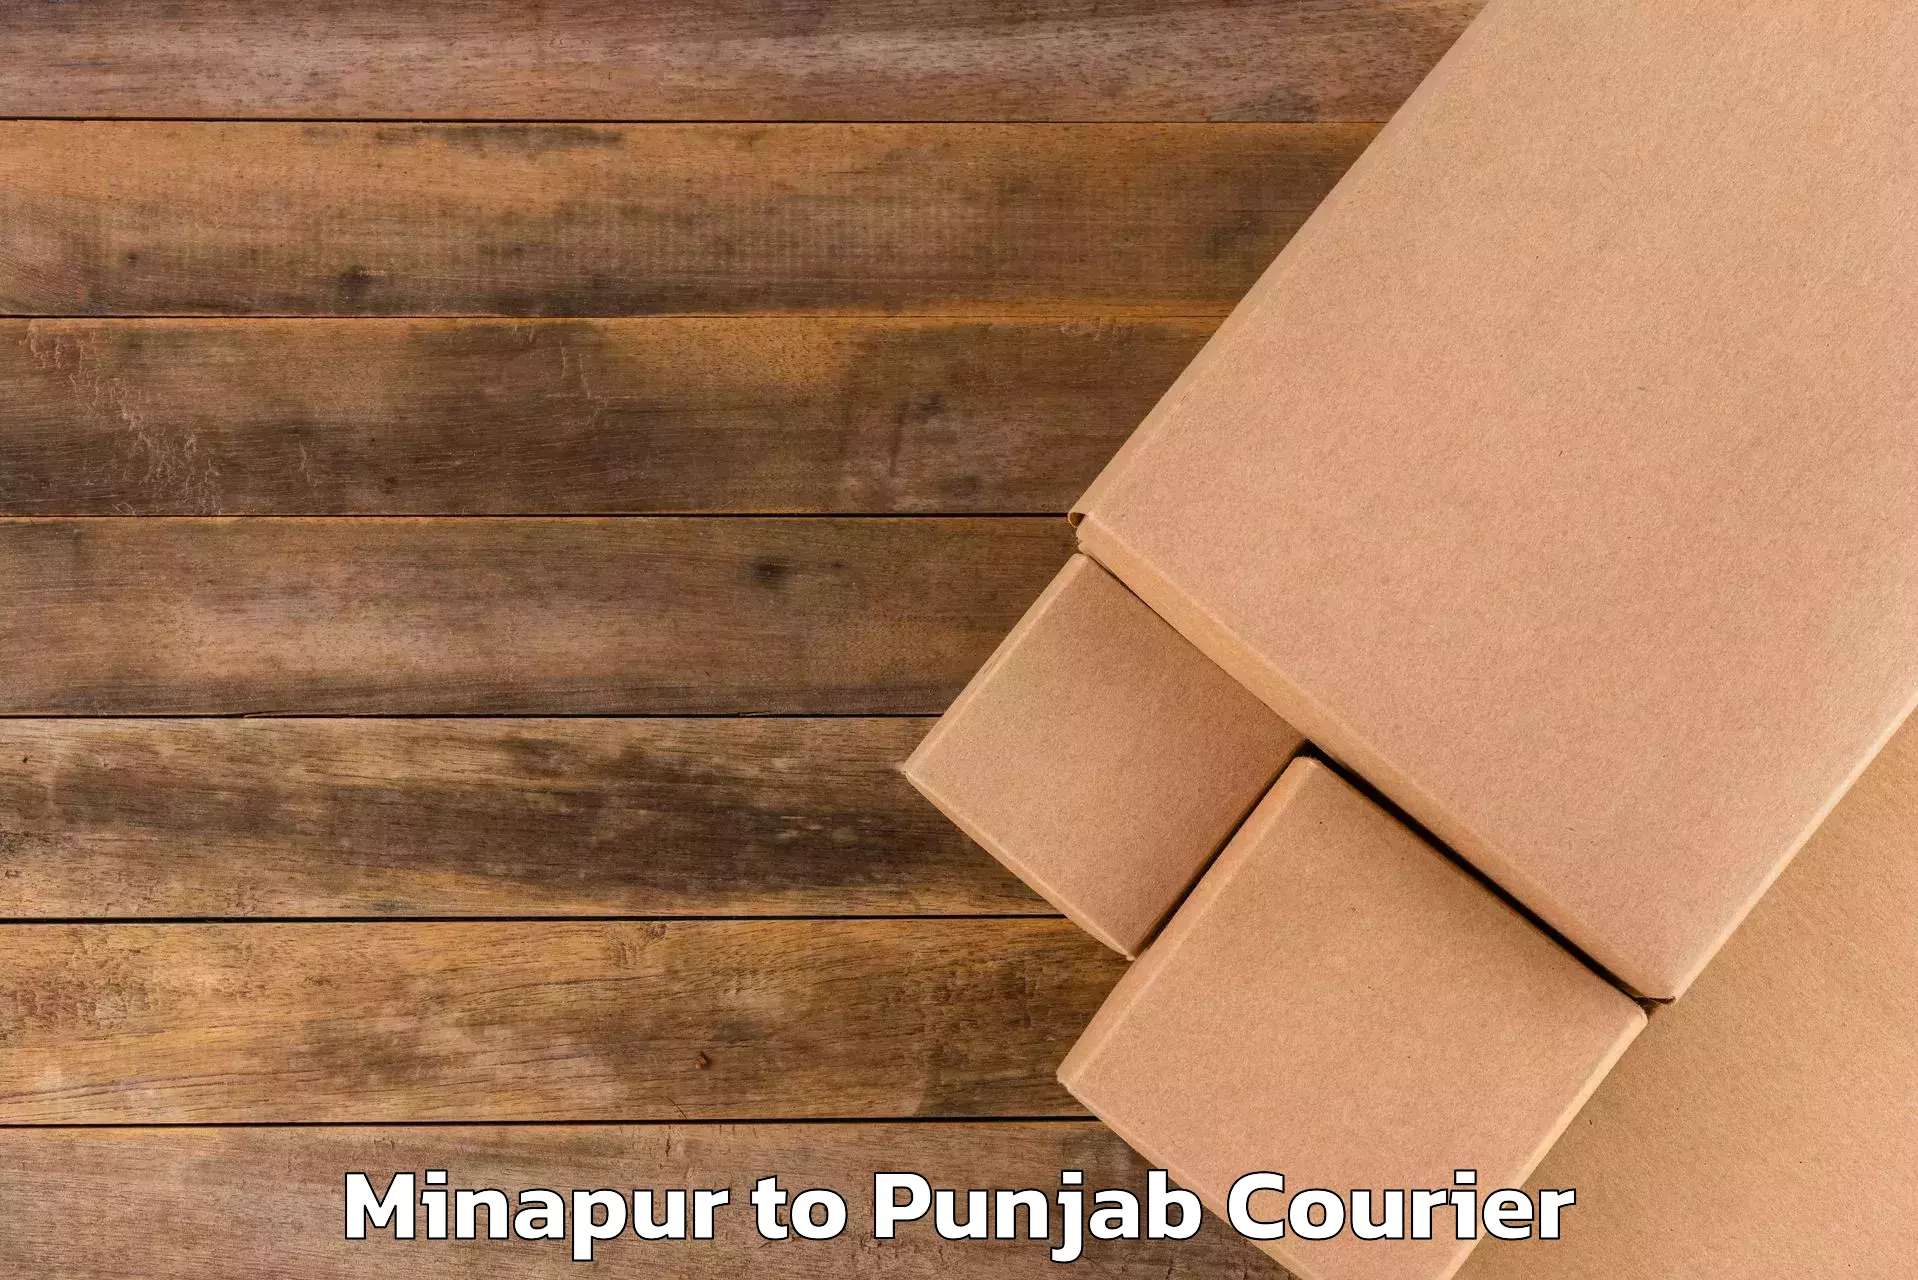 Business luggage transport in Minapur to Patiala